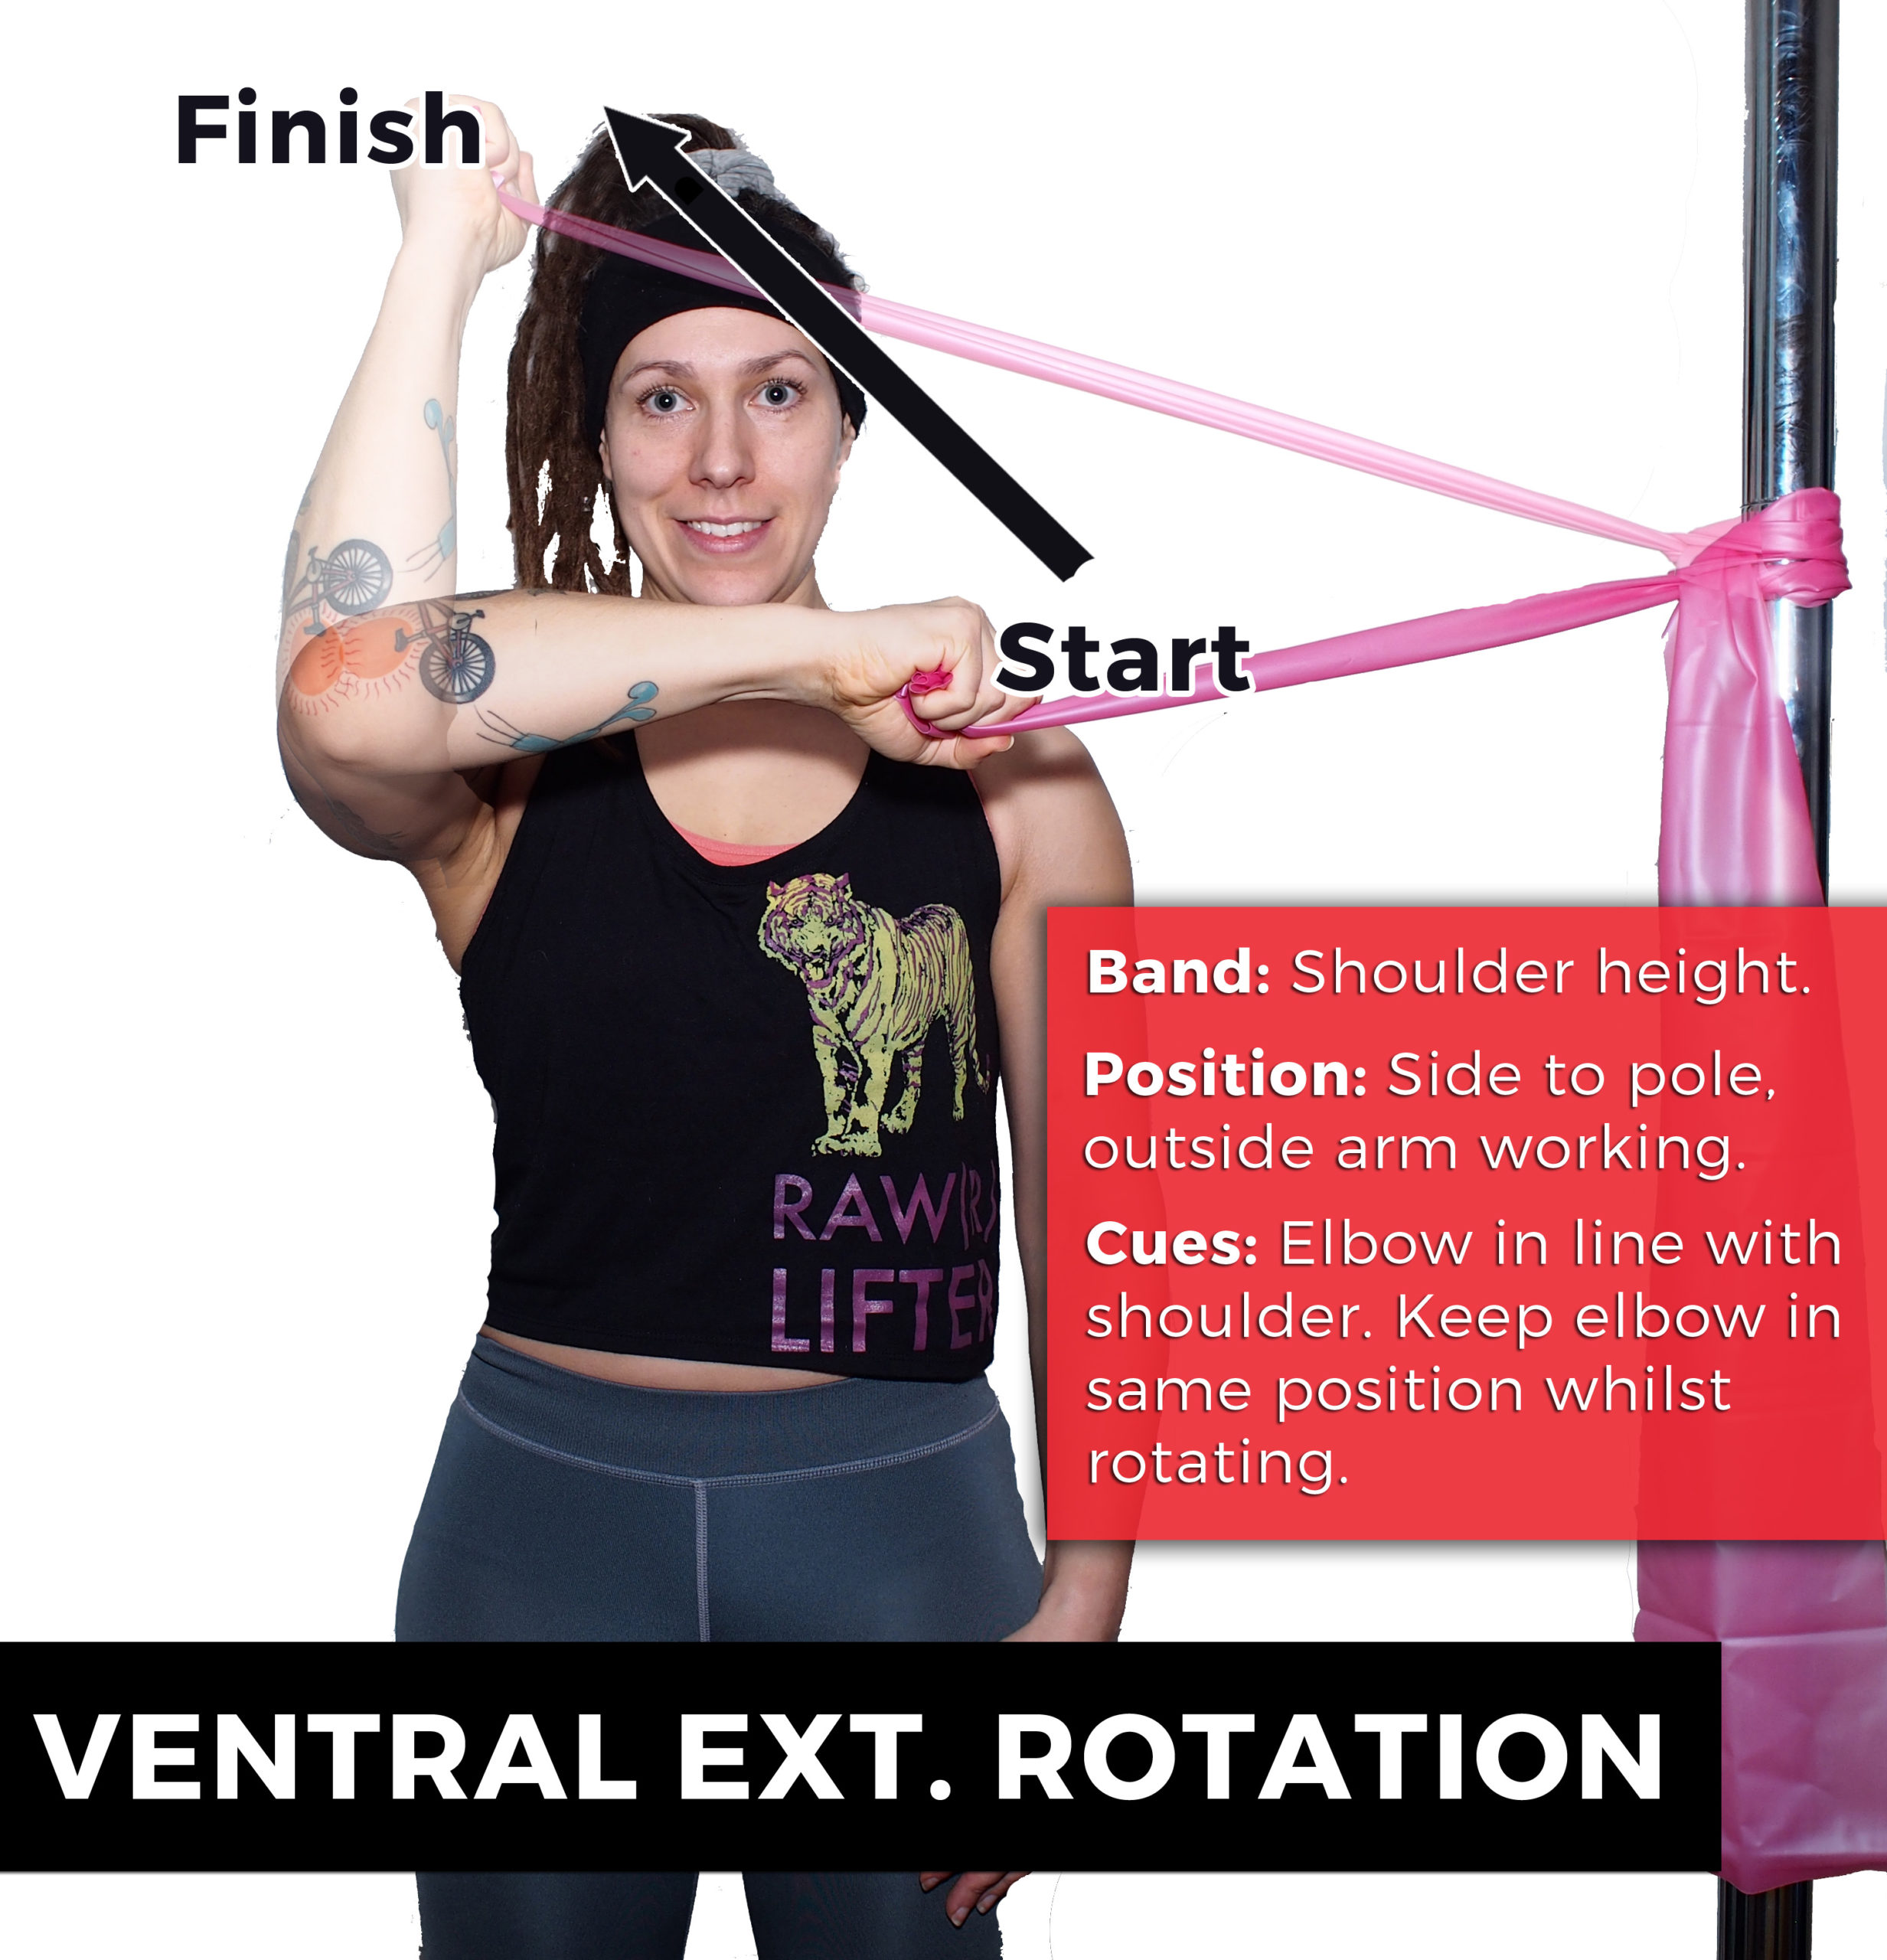 8 pre-hab drills to avoid crunchy pole shoulders